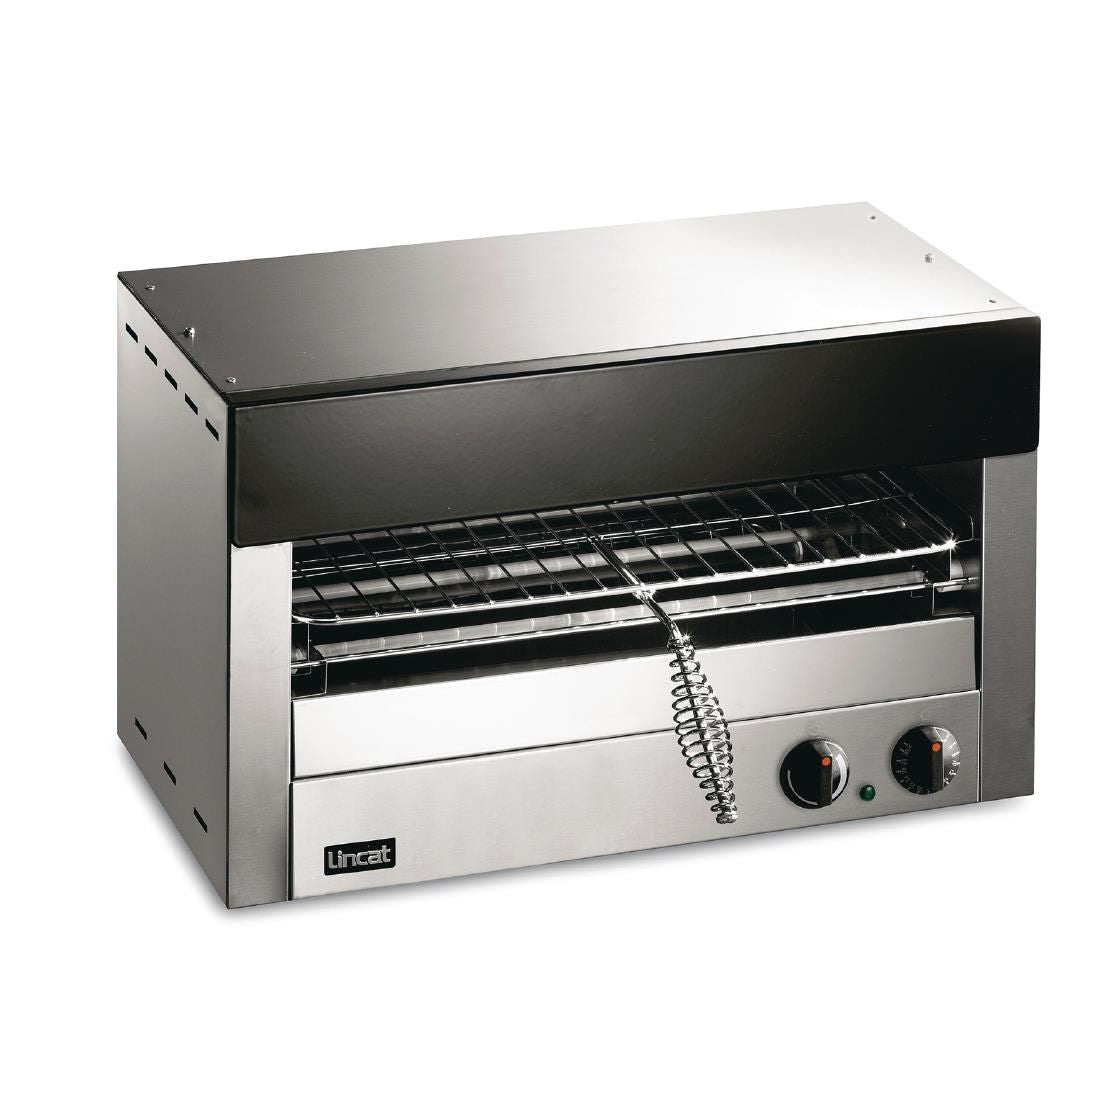 LPC - Lincat Lynx 400 Pizzachef Electric Counter-top Infra-Red Grill with Rod Shelf - W 552 mm - 3.0 kW JD Catering Equipment Solutions Ltd